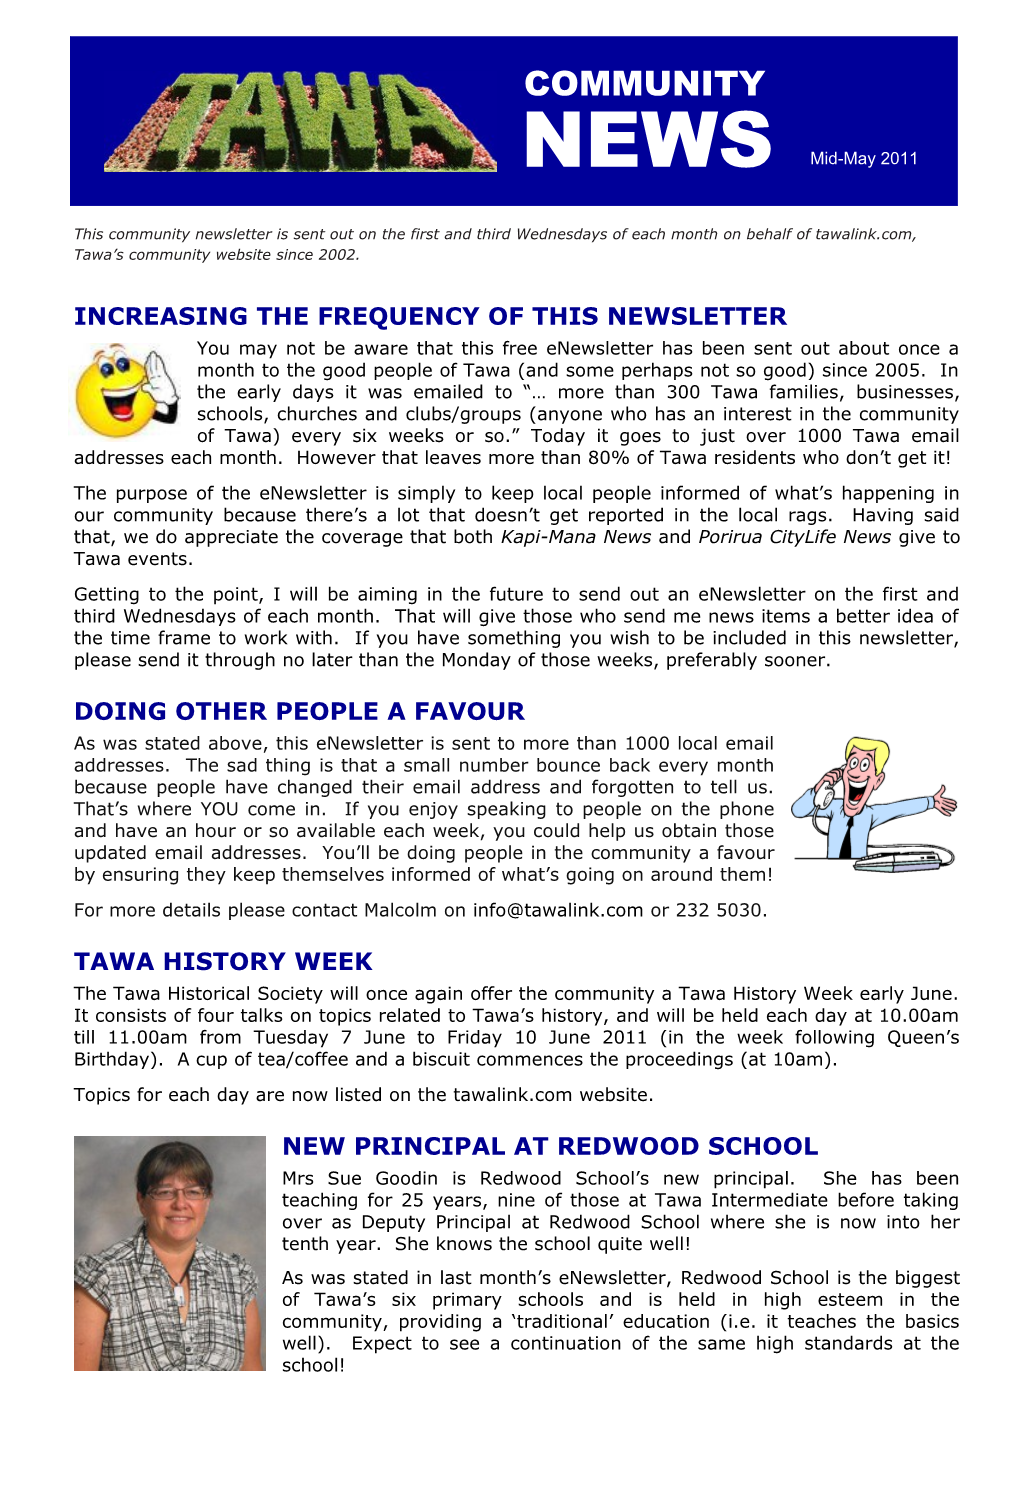 Increasing the Frequency of This Newsletter